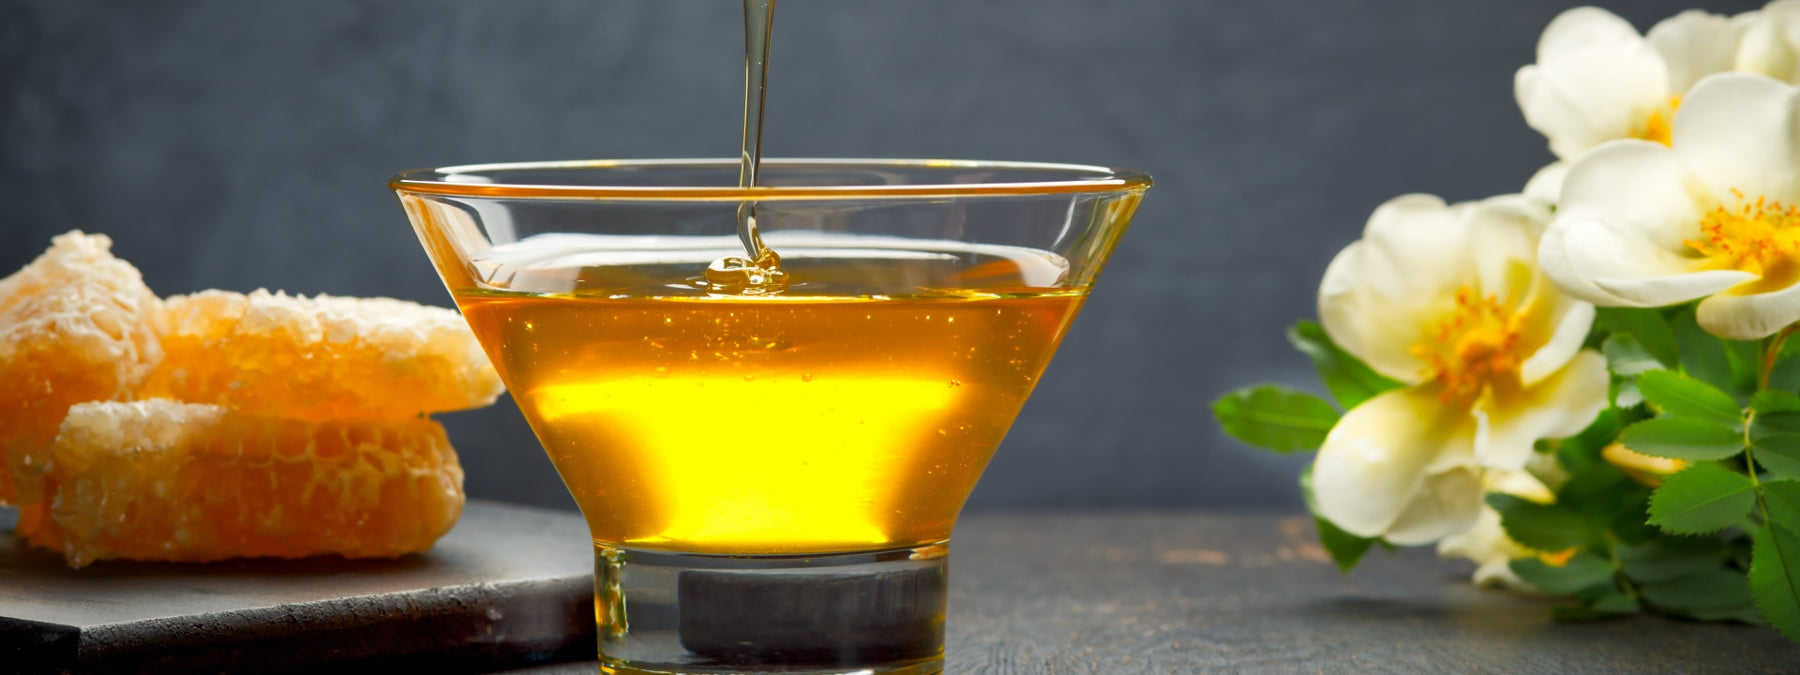 Top 5 Health Benefits Of Local Honey - Allergies, Wounds & More